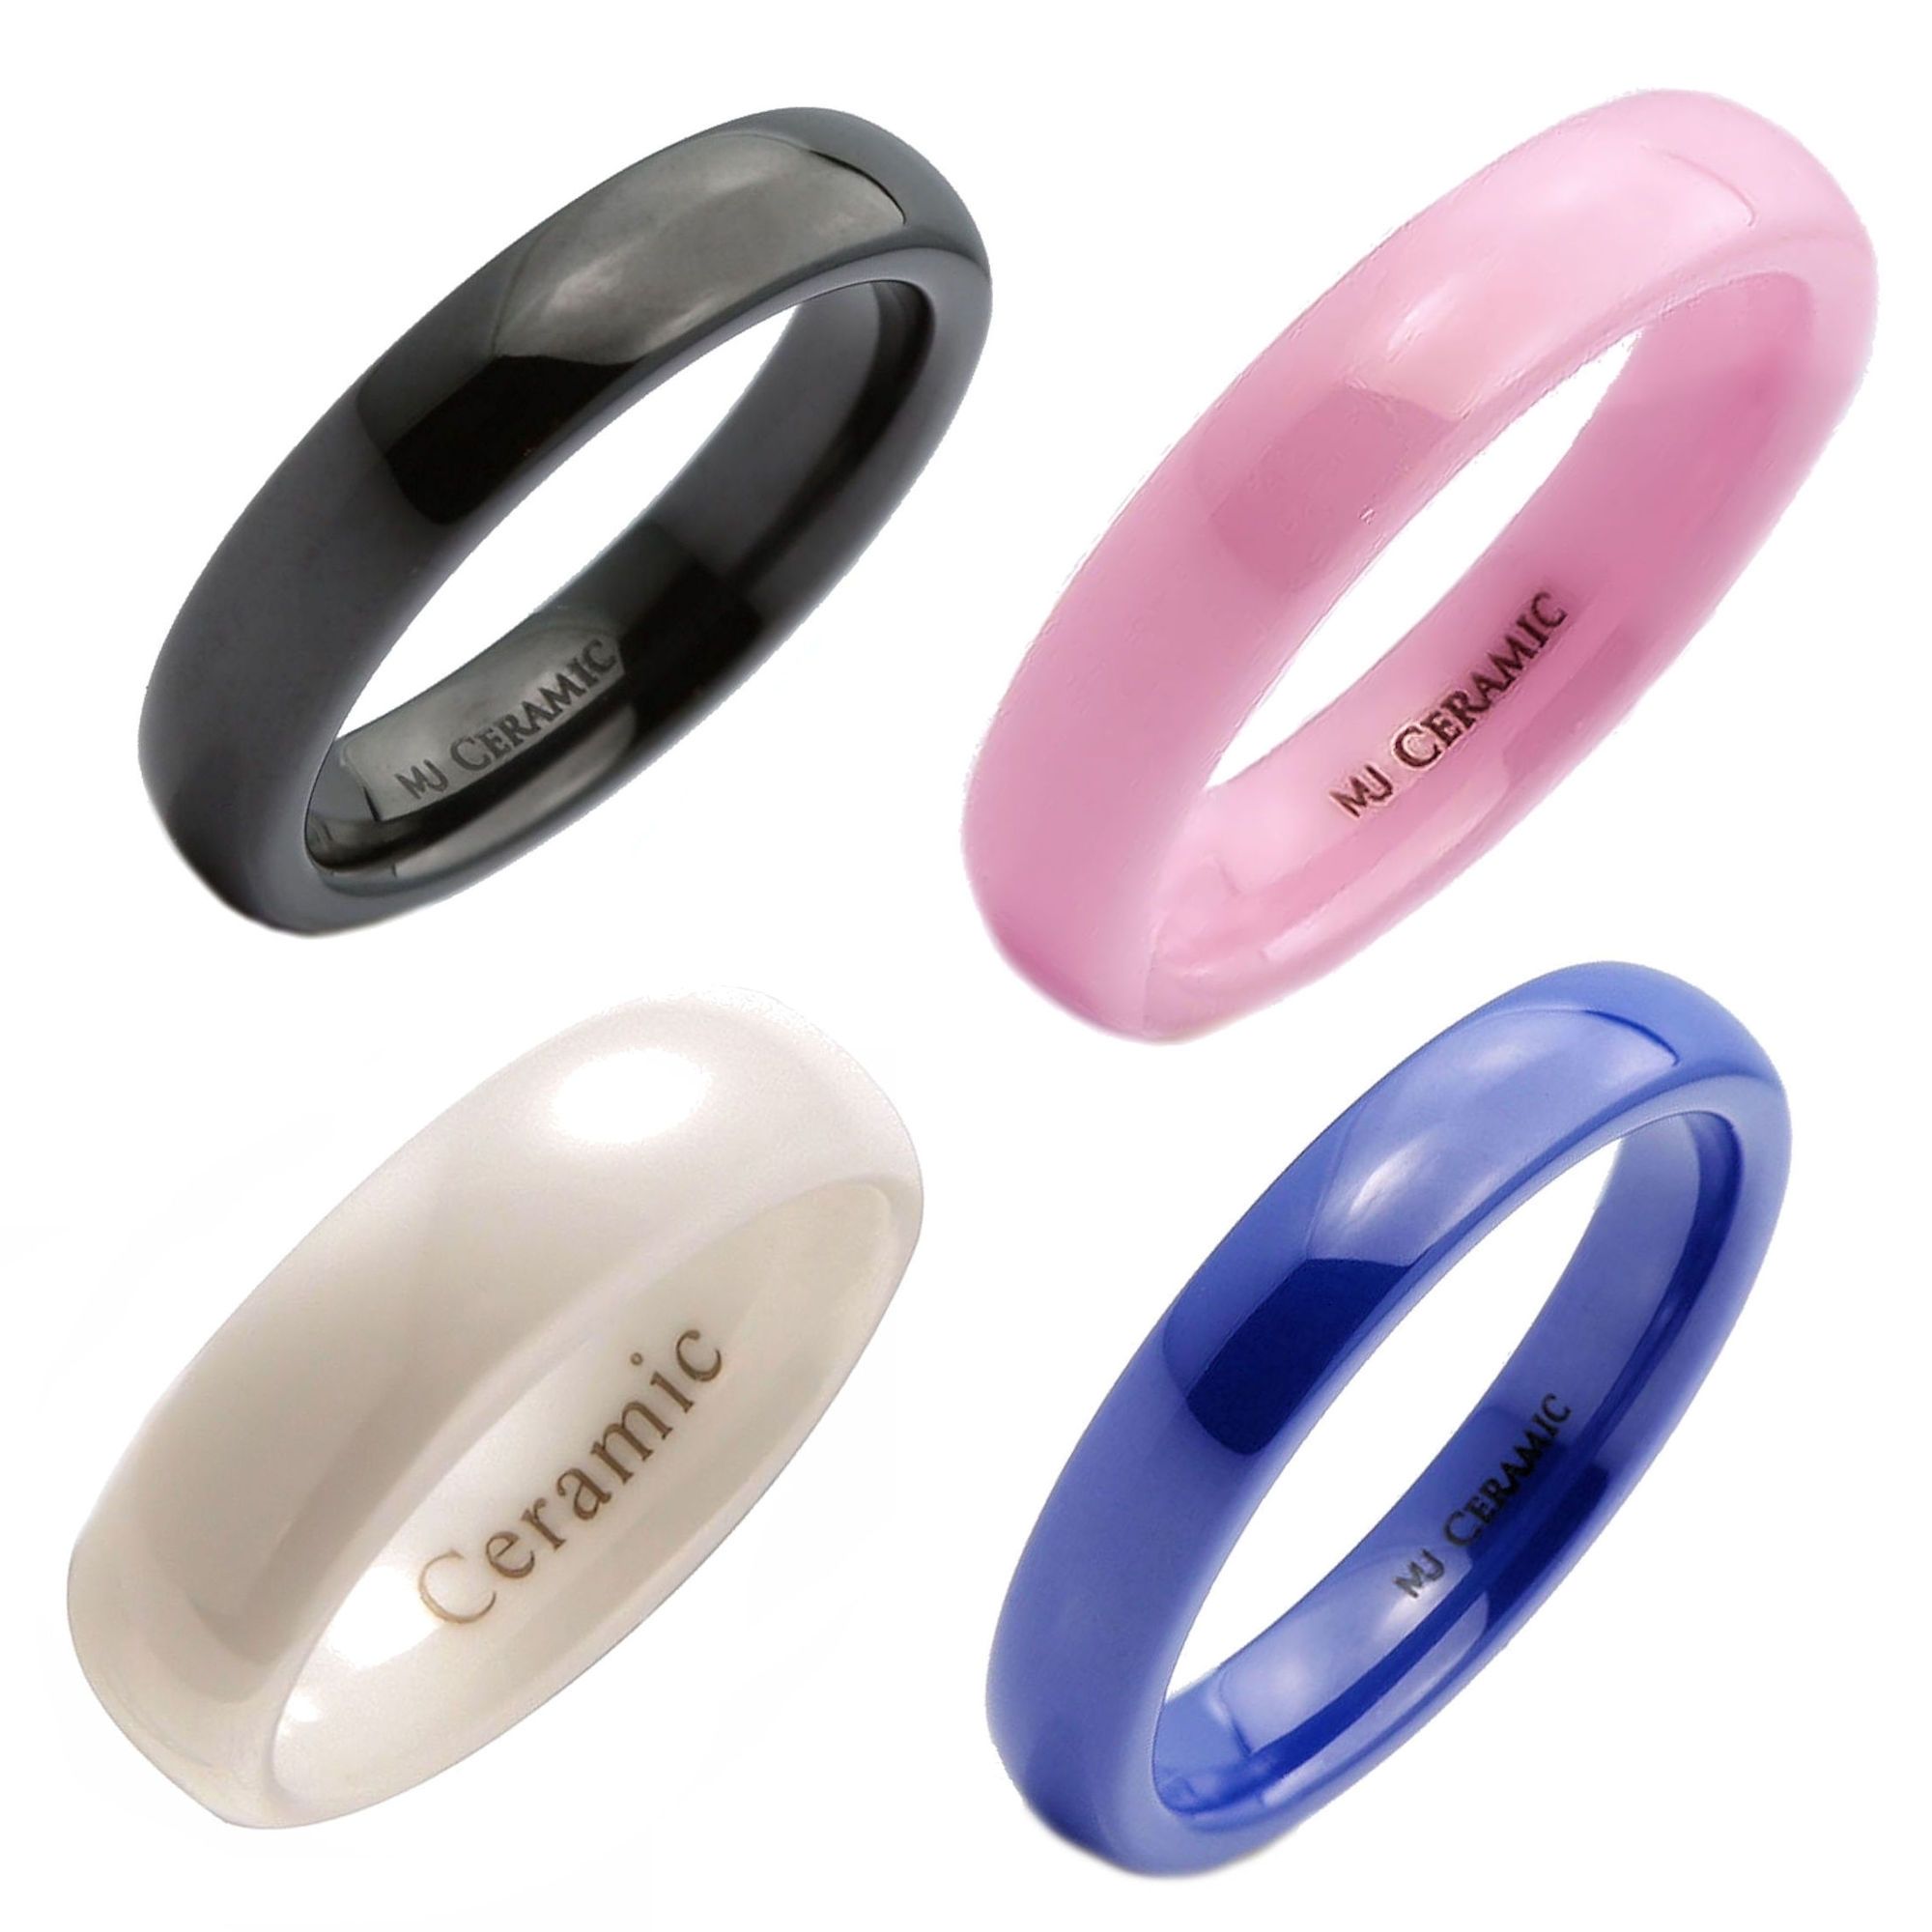 Beautiful Ceramic Wedding Ring 3 To 10mm Pink White Blue Black | Ebay In Most Up To Date White Ceramic Wedding Bands (View 7 of 15)